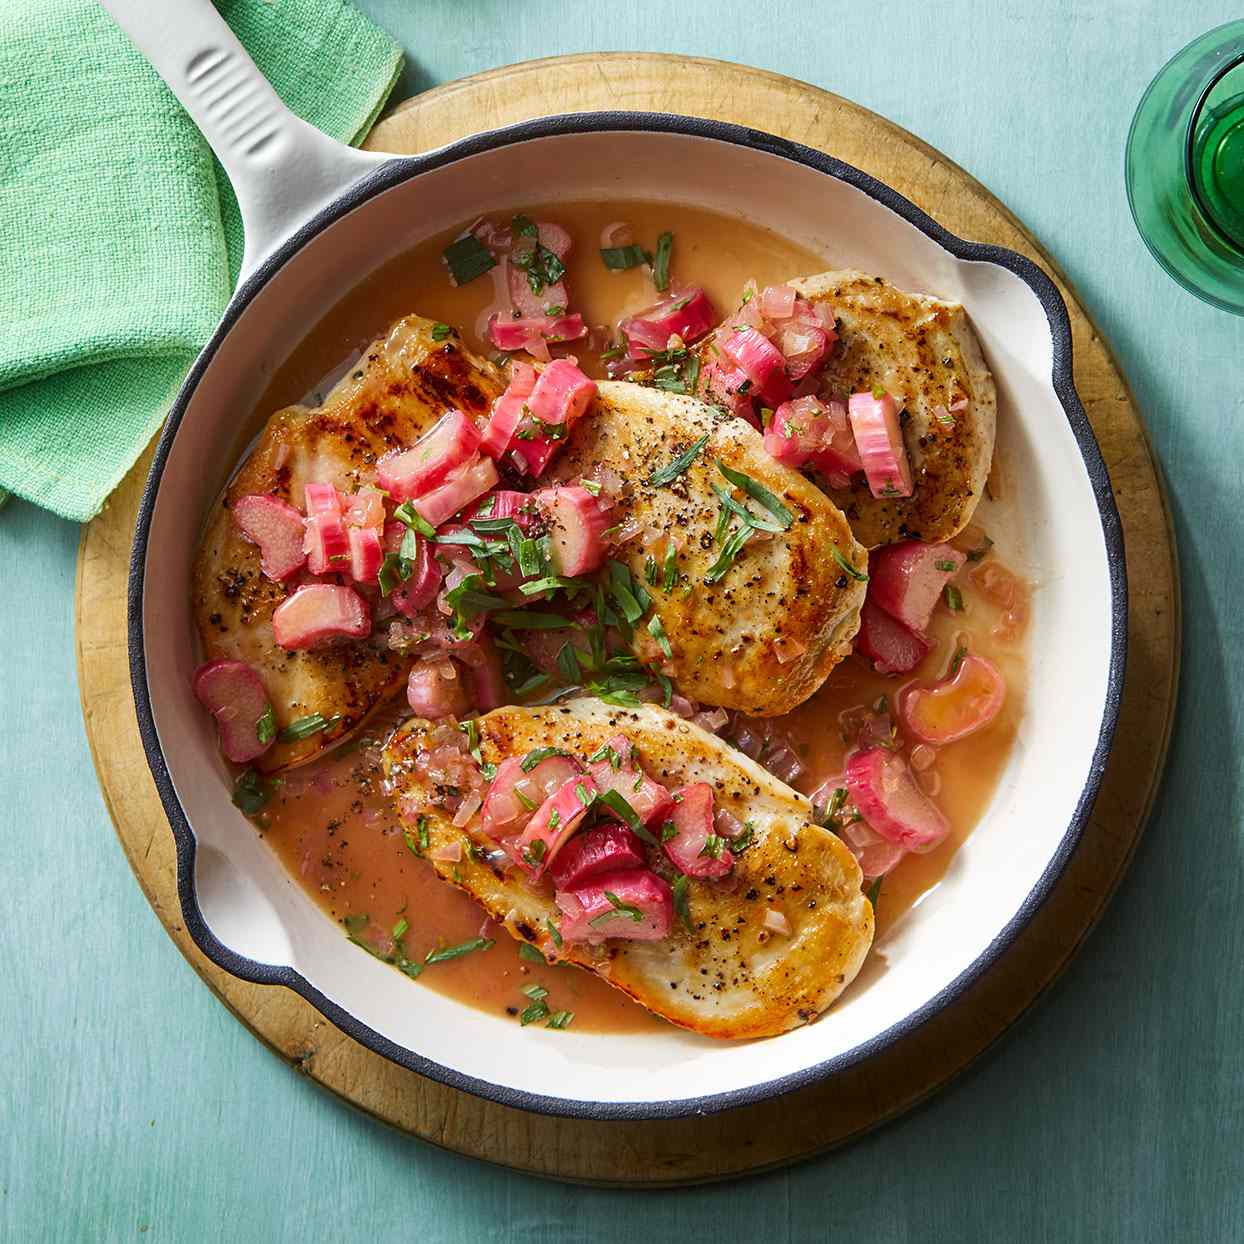 Easy Chicken Cutlets with Rhubarb Sauce